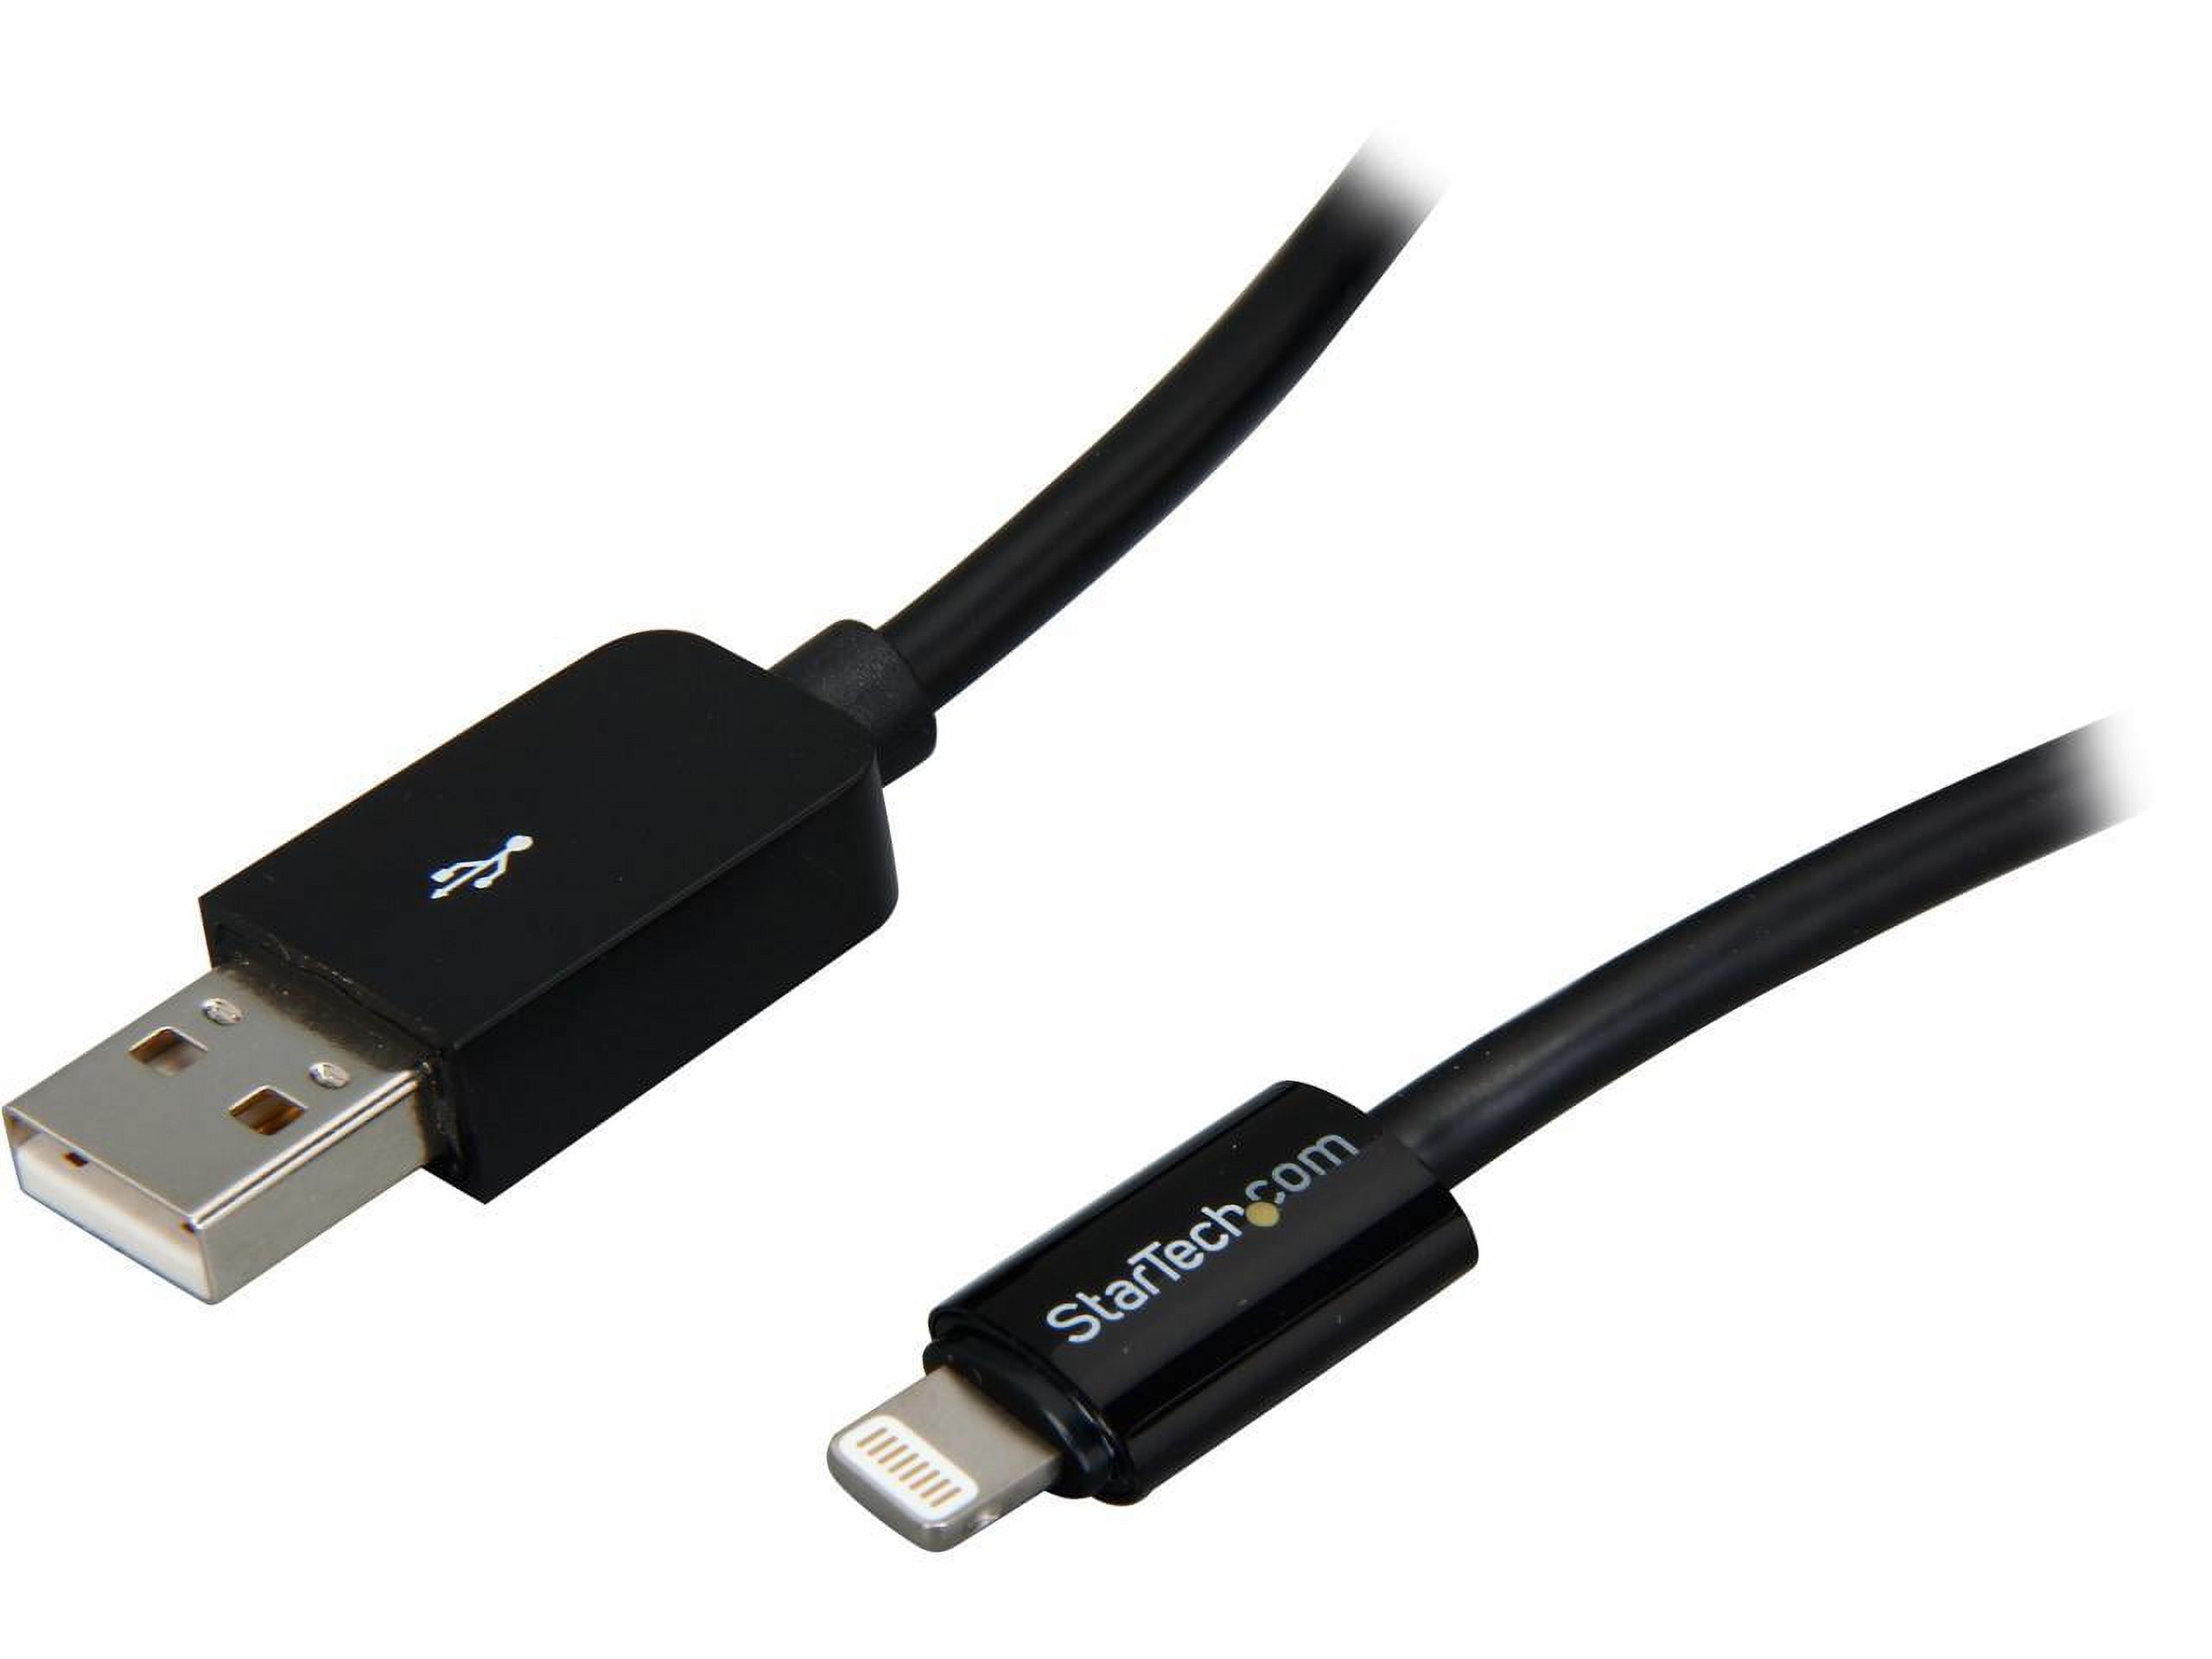 StarTech.com USBLT3MB Black 3m (10ft) Long Black Apple 8-pin Lightning Connector to USB Cable for iPhone / iPod / iPad - image 1 of 3